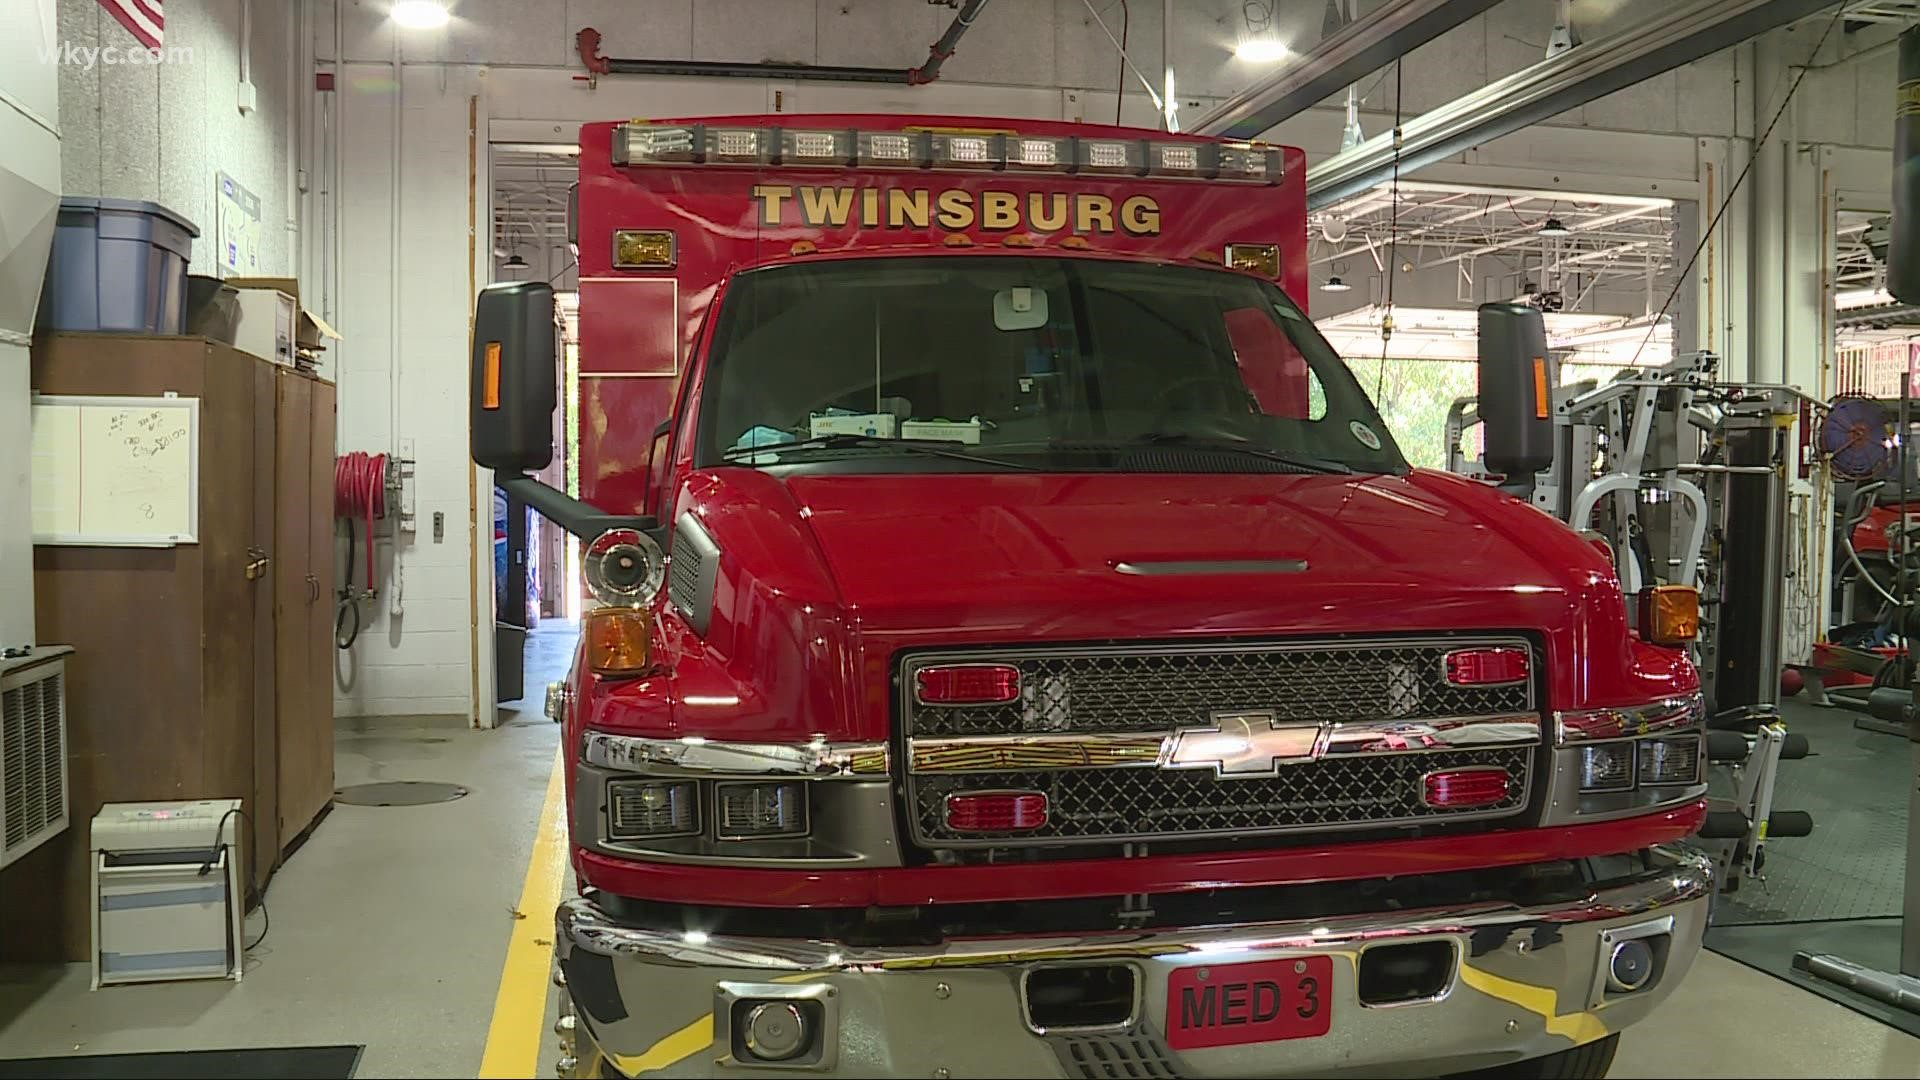 Fire departments in Summit County are reporting longer-than-normal wait times at local emergency rooms. It's led to concerns on staffing and response times.